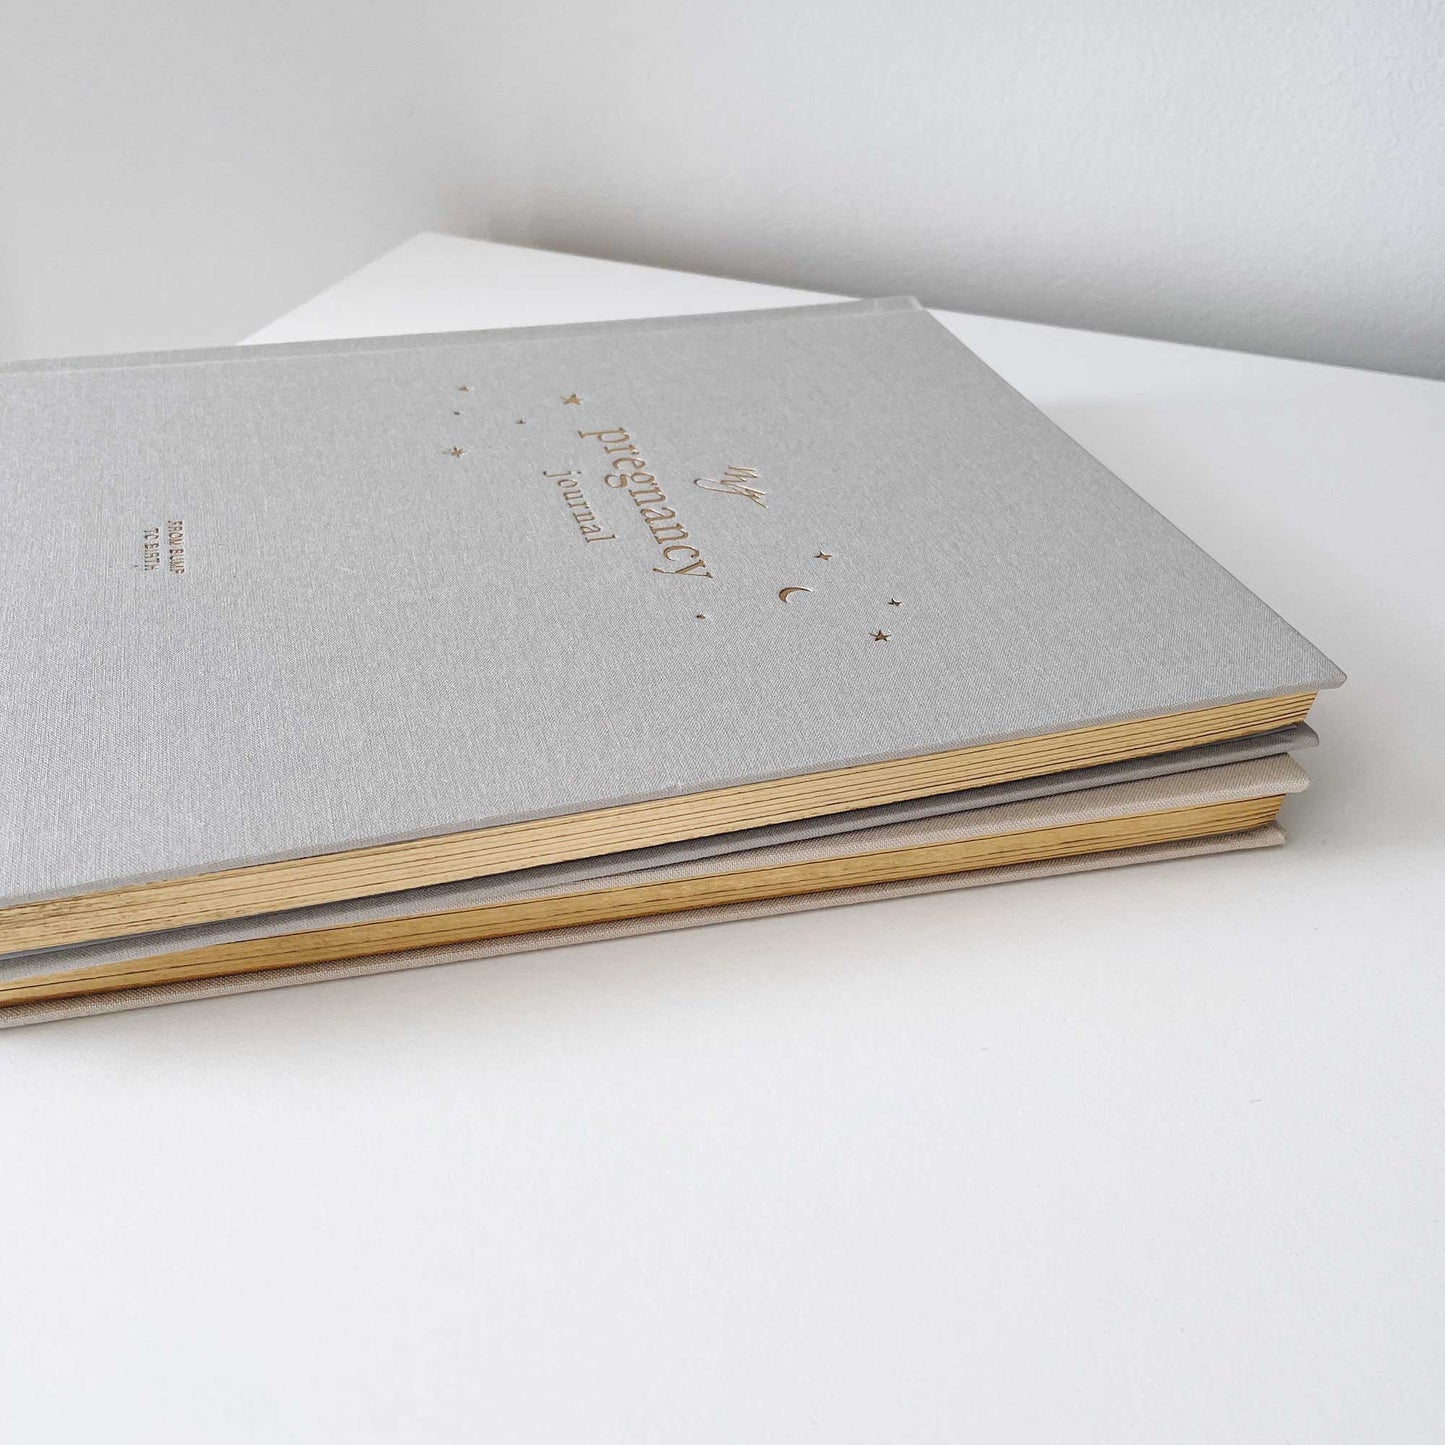 Blush and Gold My Pregnancy Journal - Grey with Gilded Edges Memory Book